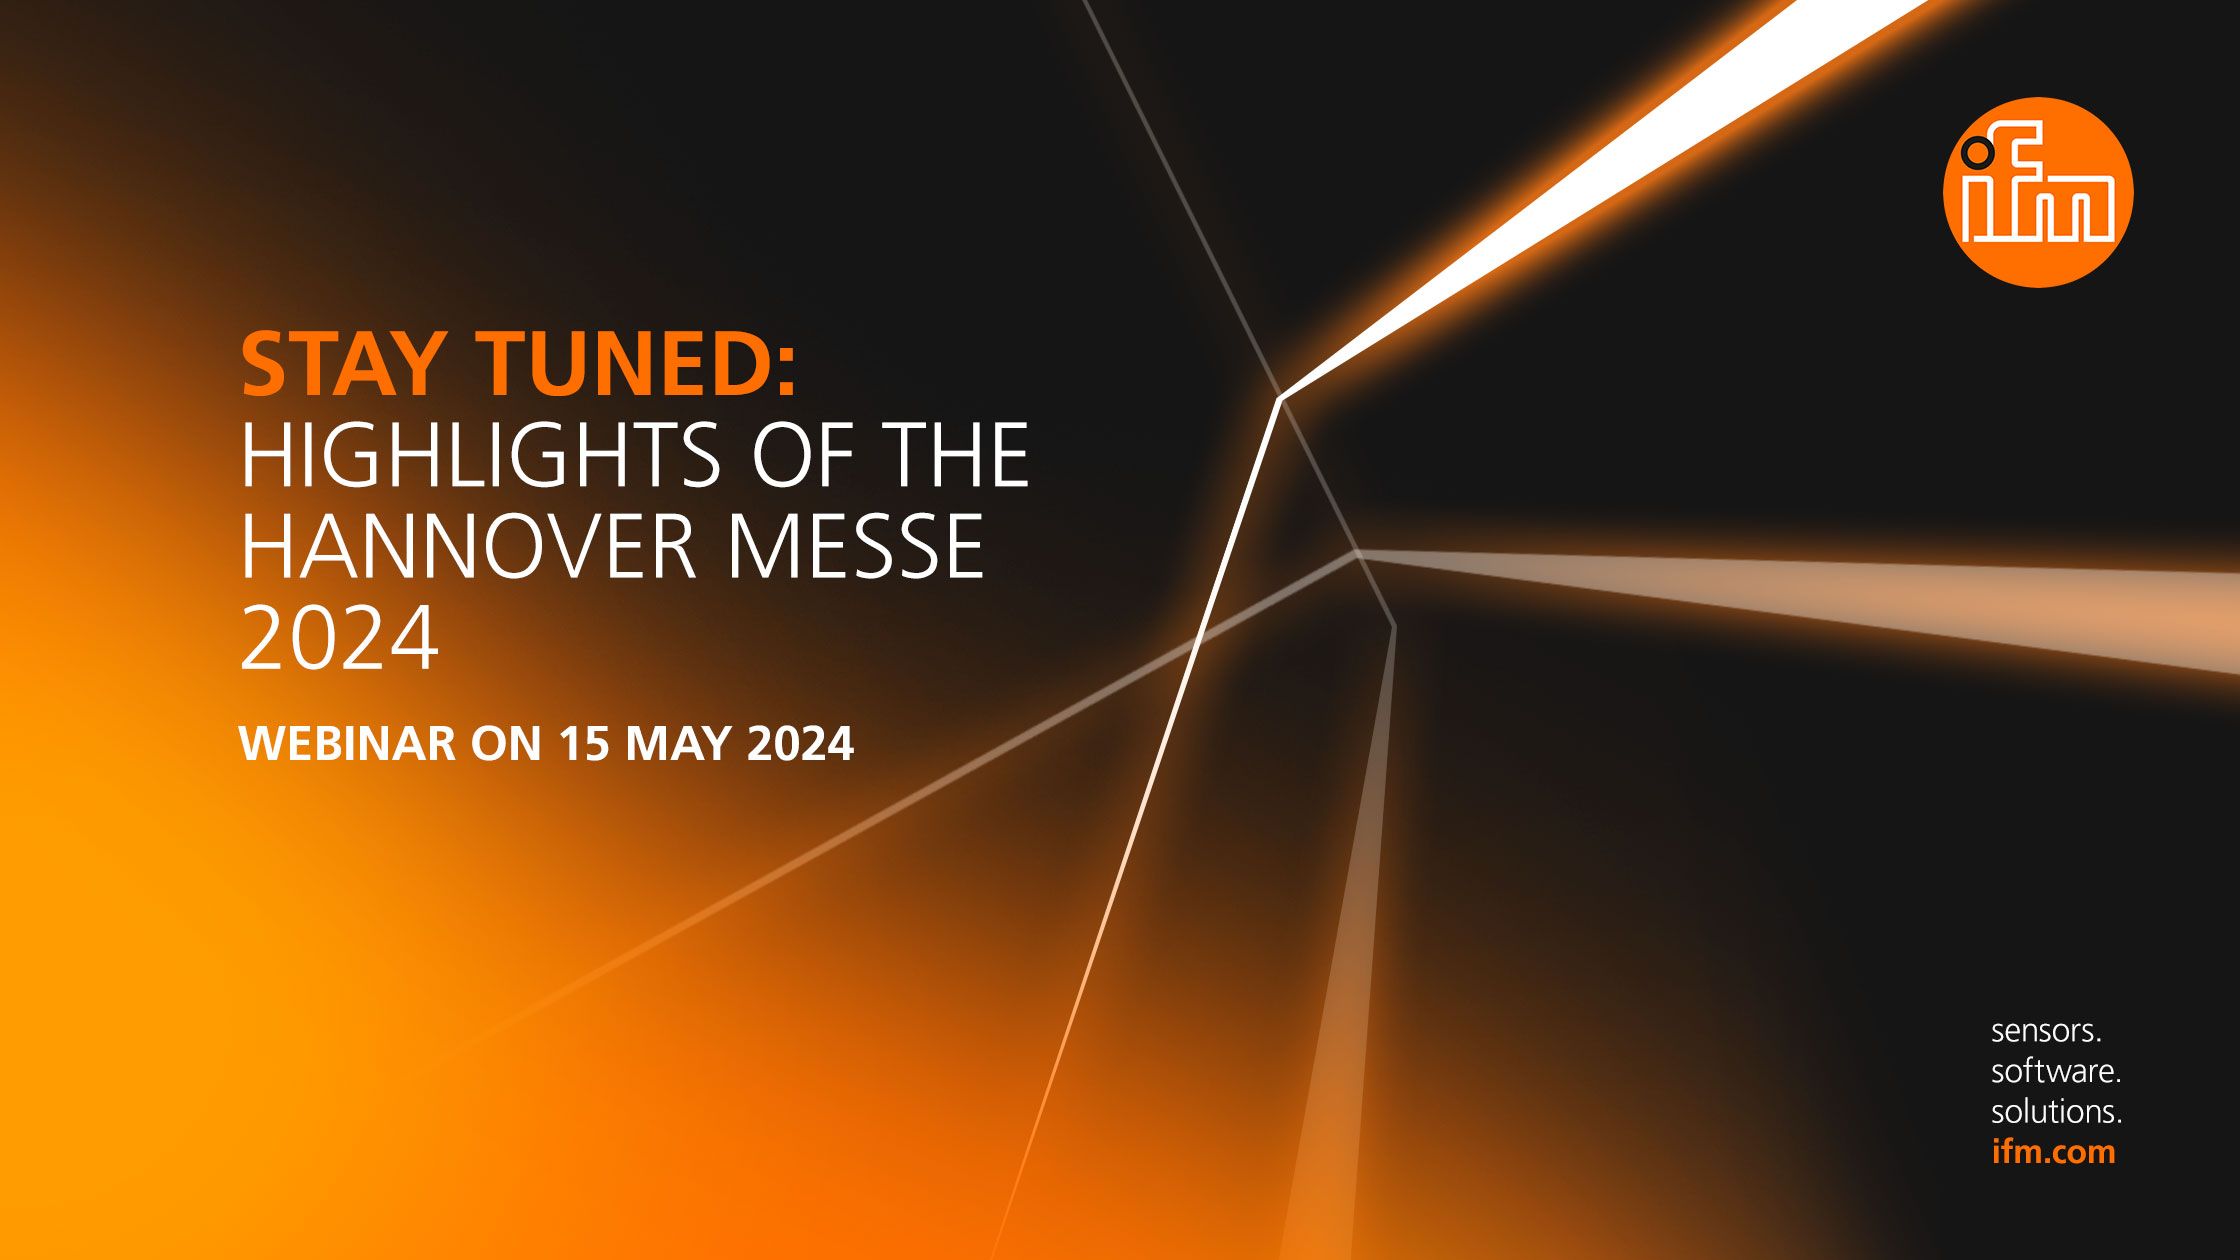 Stay tuned: Highlights of the Hannover Messe 2024